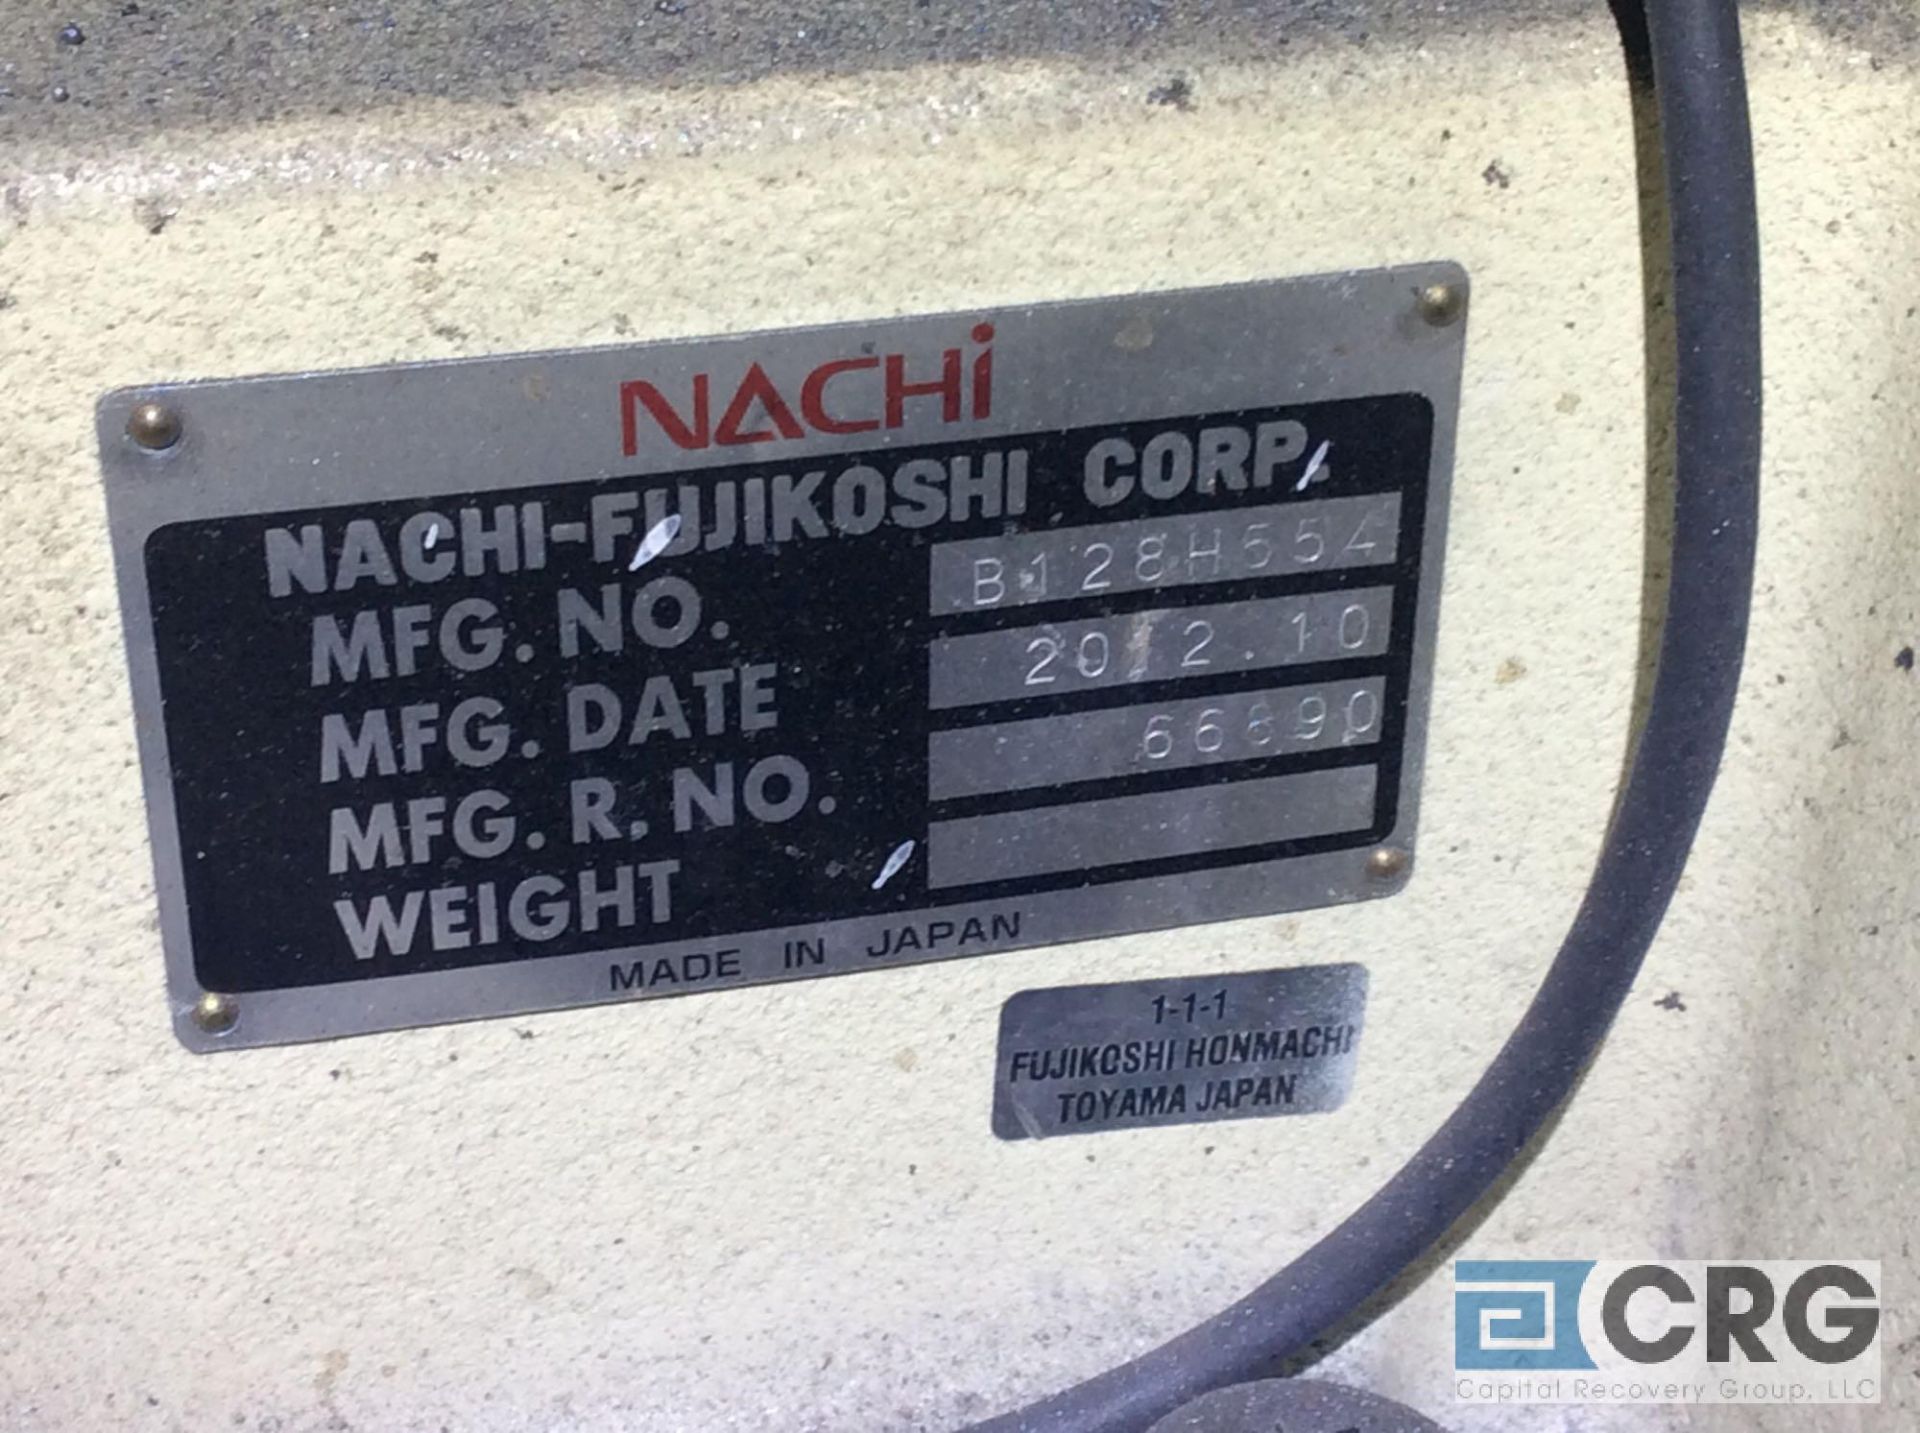 6-Axis Nachi MC-350-01 sub fixture handling robot with controls (2012), subject to entirety bid - Image 4 of 7